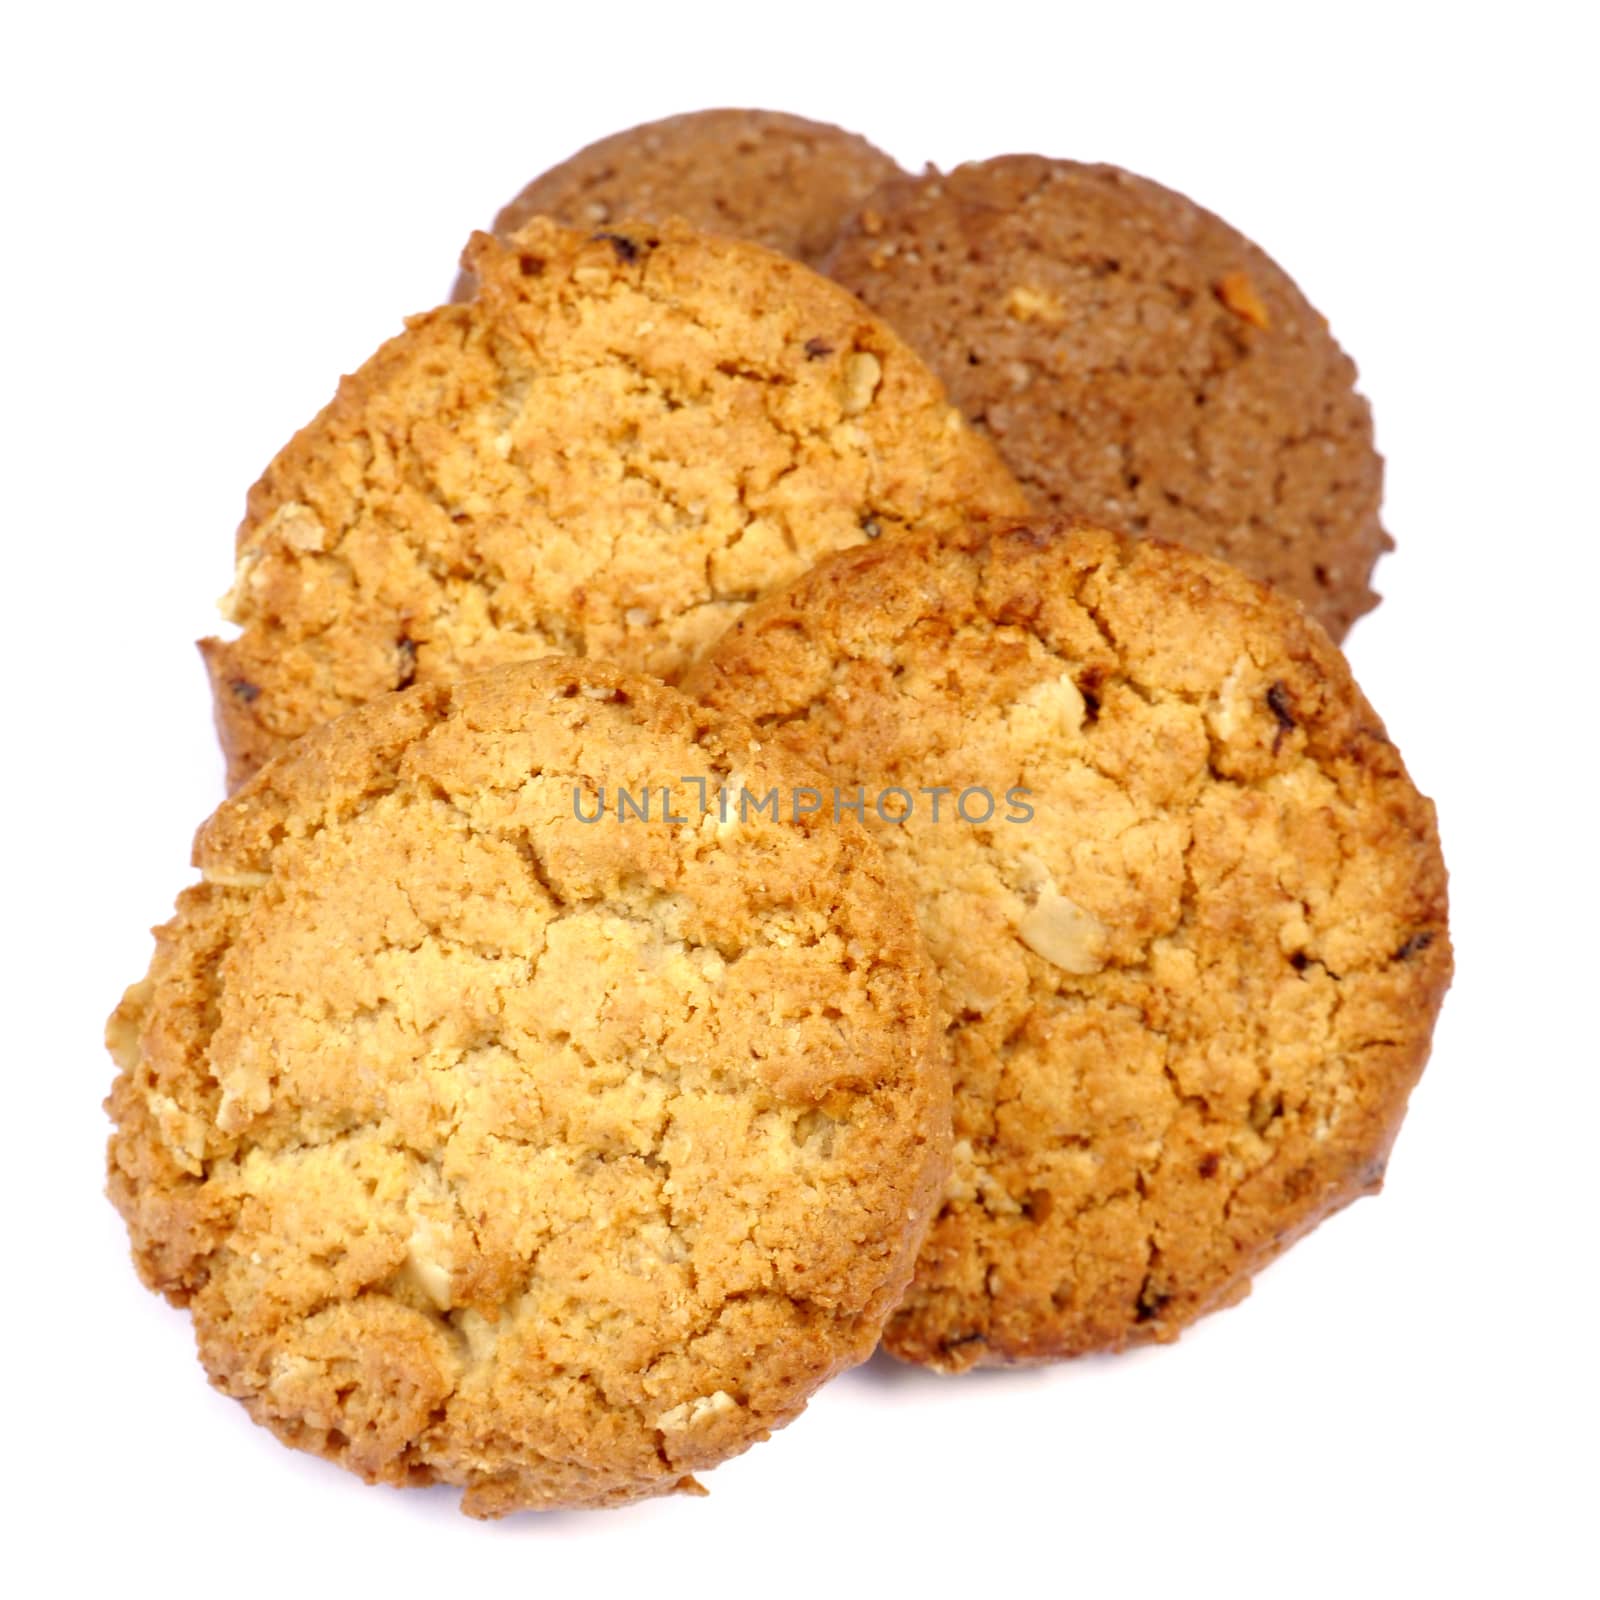 Cookies on a white background.